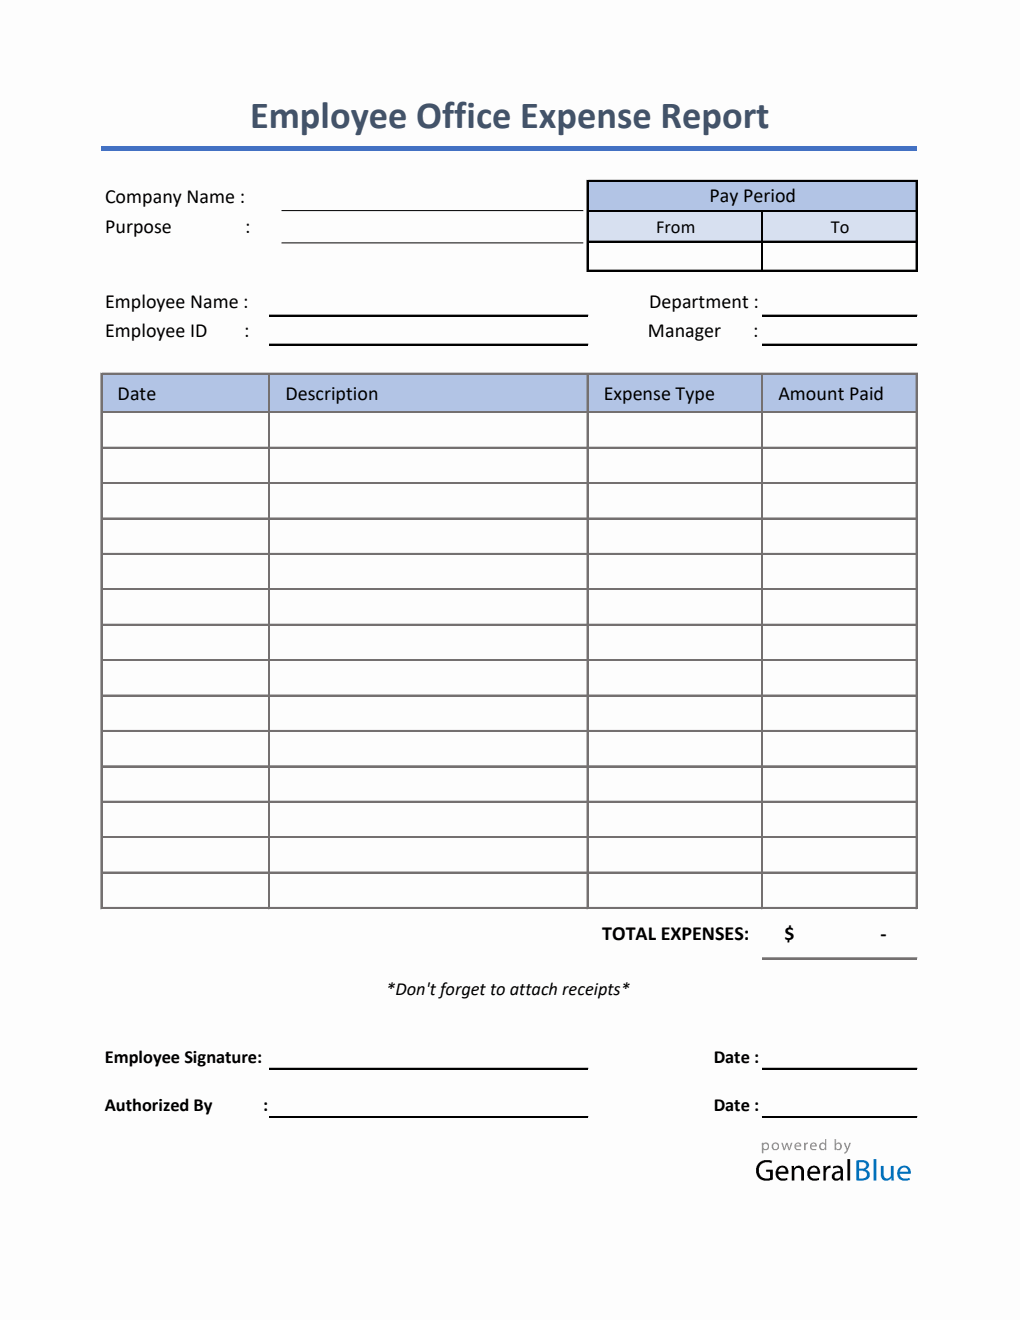 Employee Office Expense Report Template in Excel